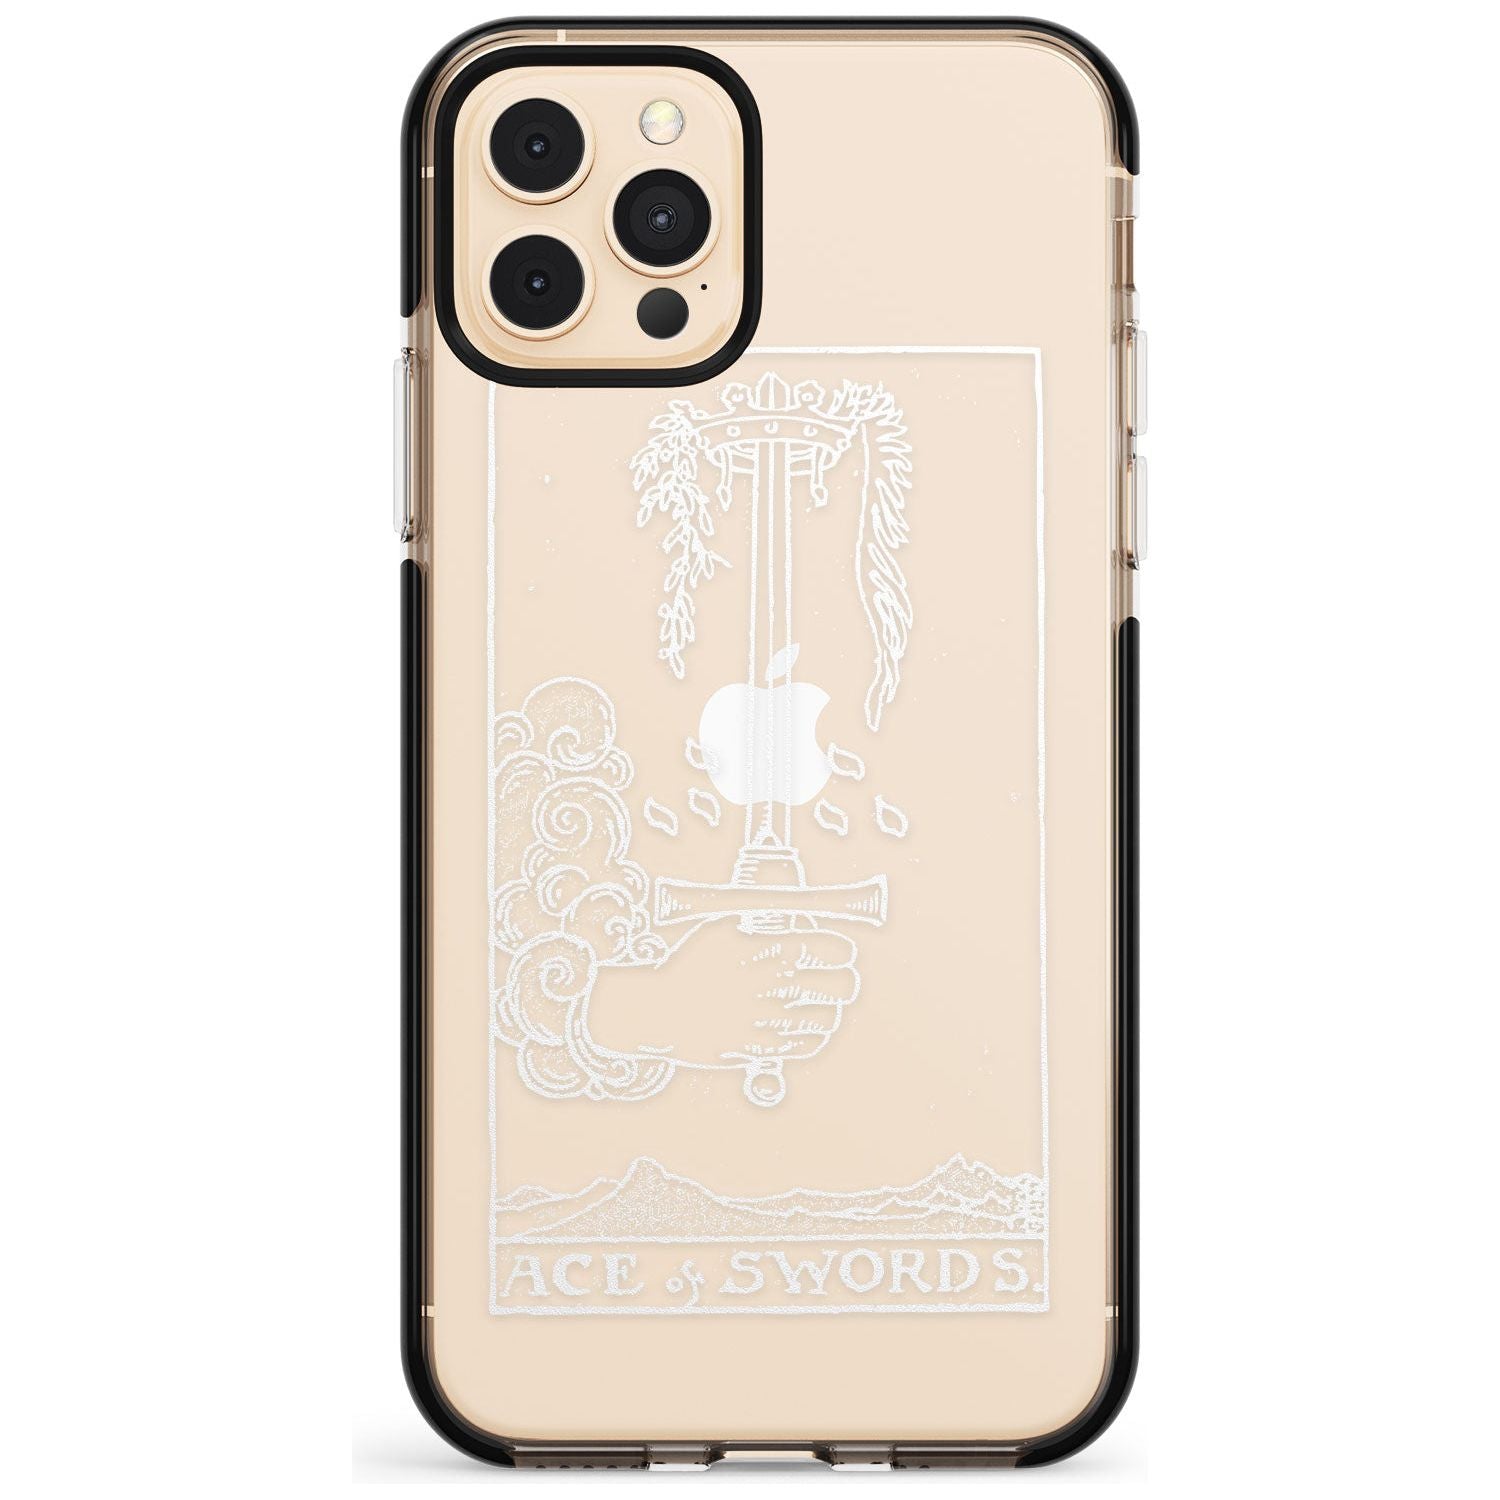 Ace of Swords Tarot Card - White Transparent Pink Fade Impact Phone Case for iPhone 11